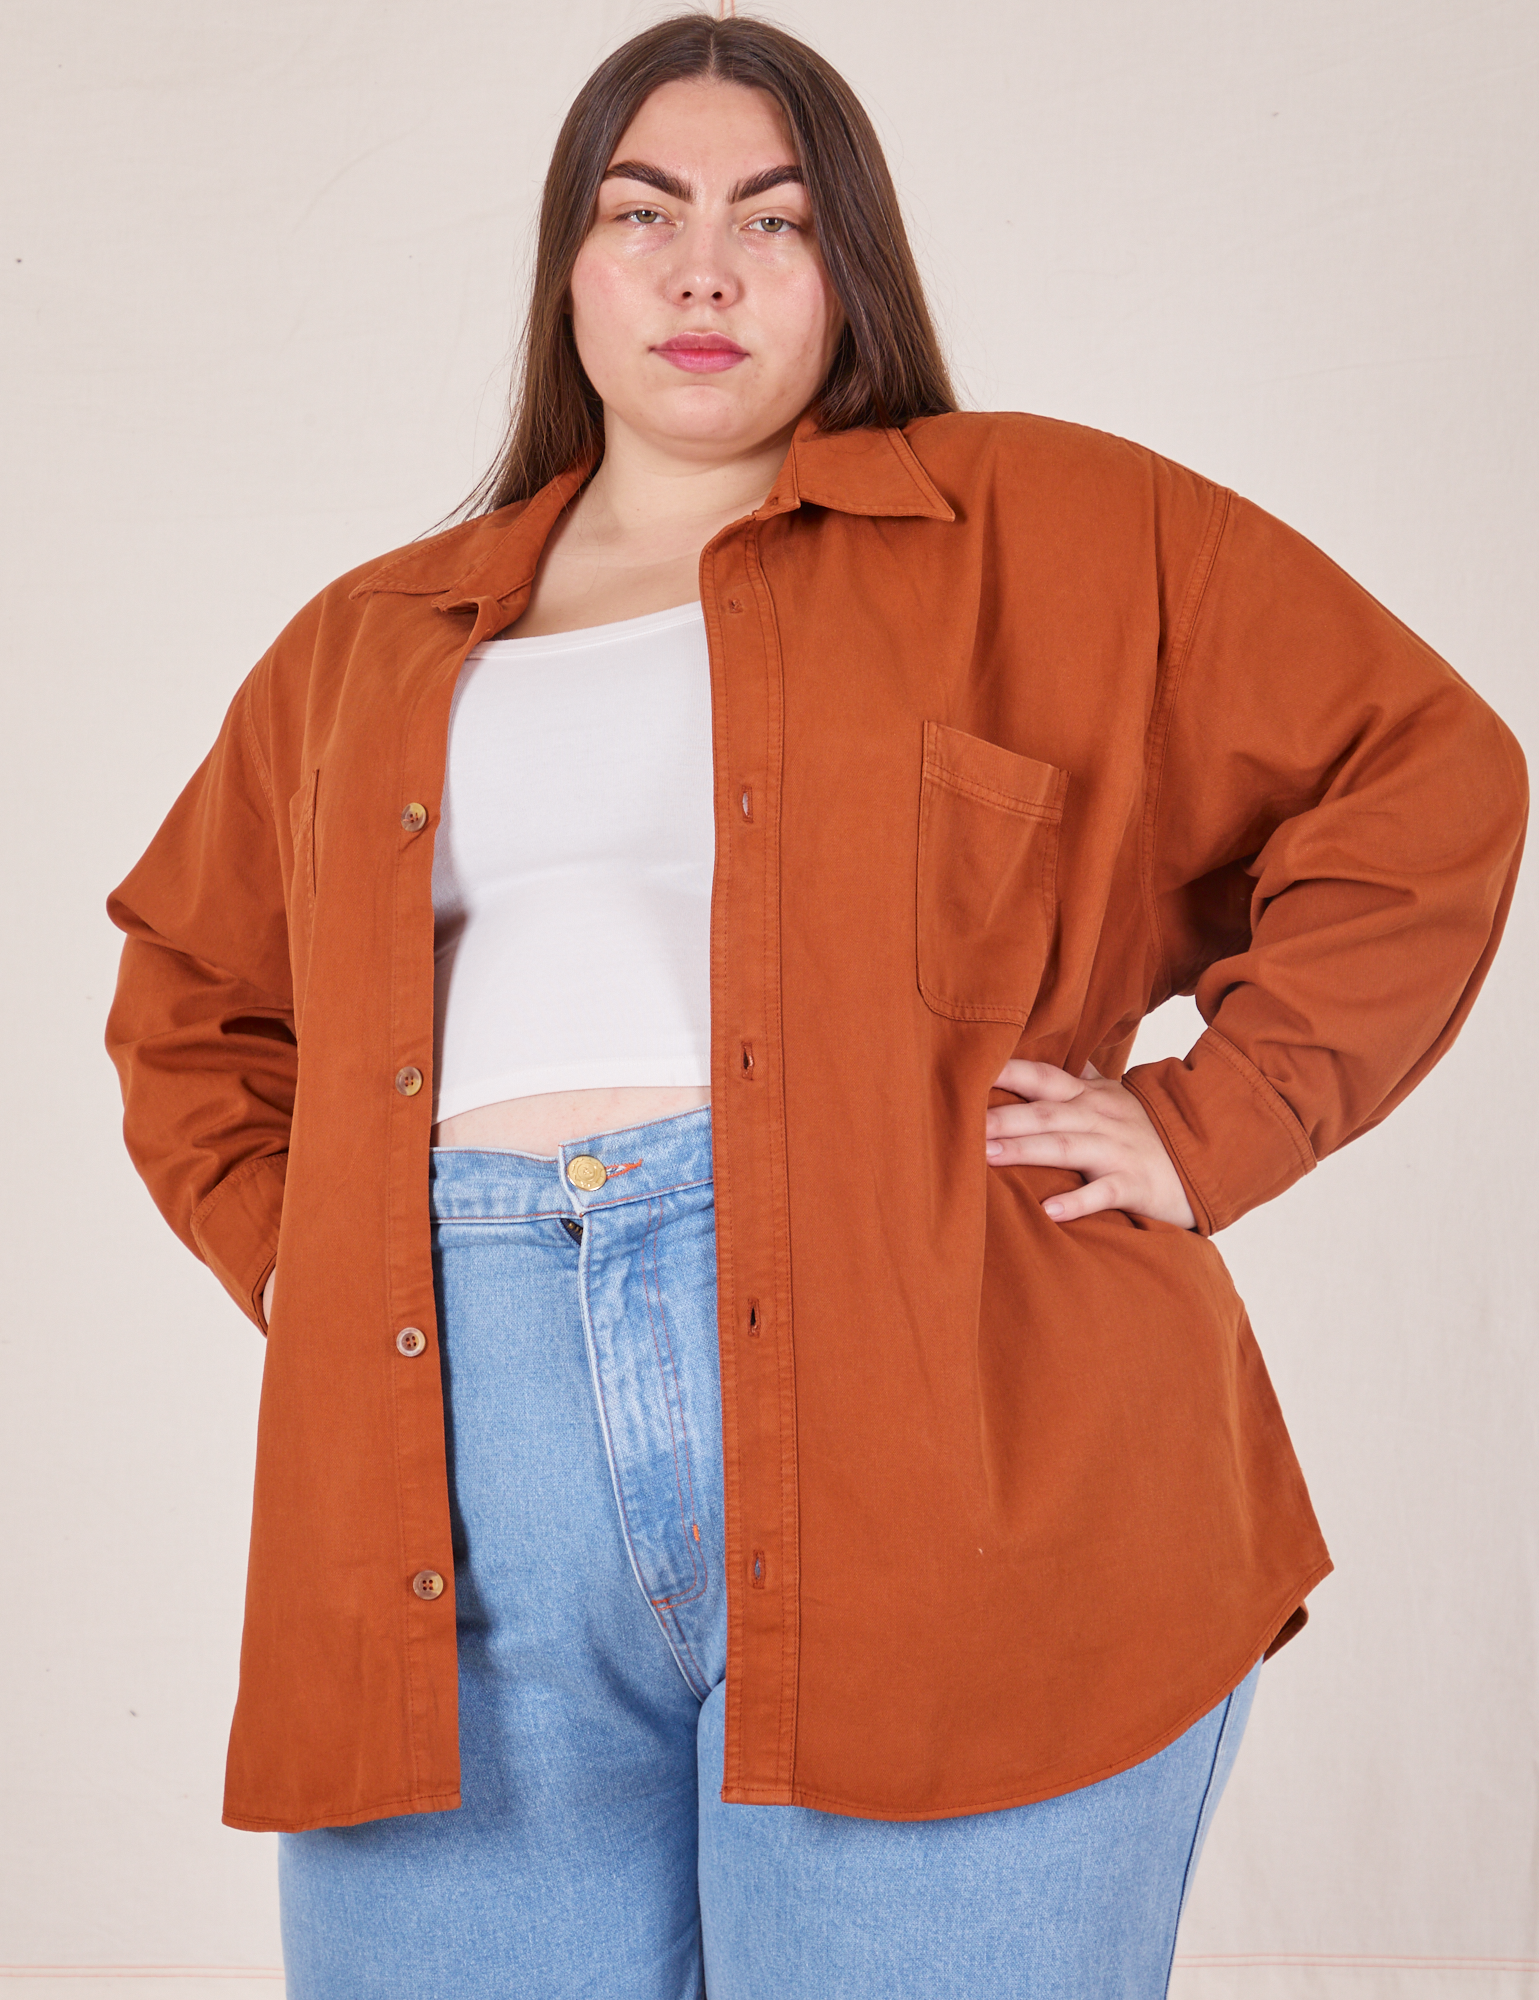 Marielena is wearing size 0XL Oversize Overshirt in Burnt Terracotta with vintage off-white Cropped Tank